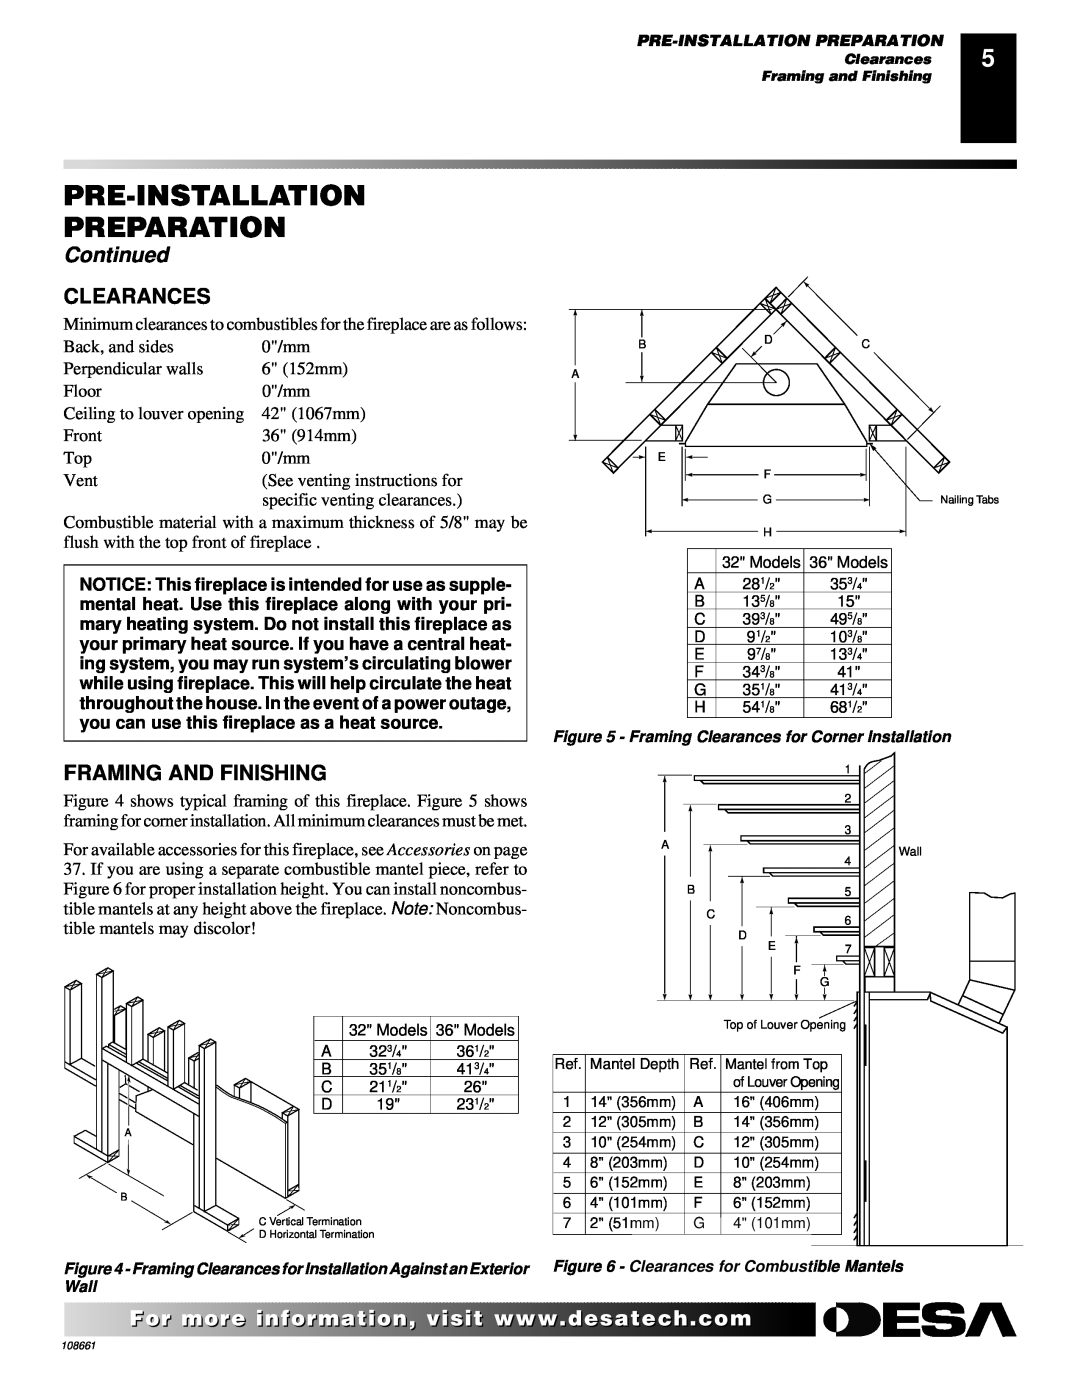 Desa T32N, T36N, T32P, T36P installation manual Pre-Installation Preparation, Continued, Clearances, Framing And Finishing 